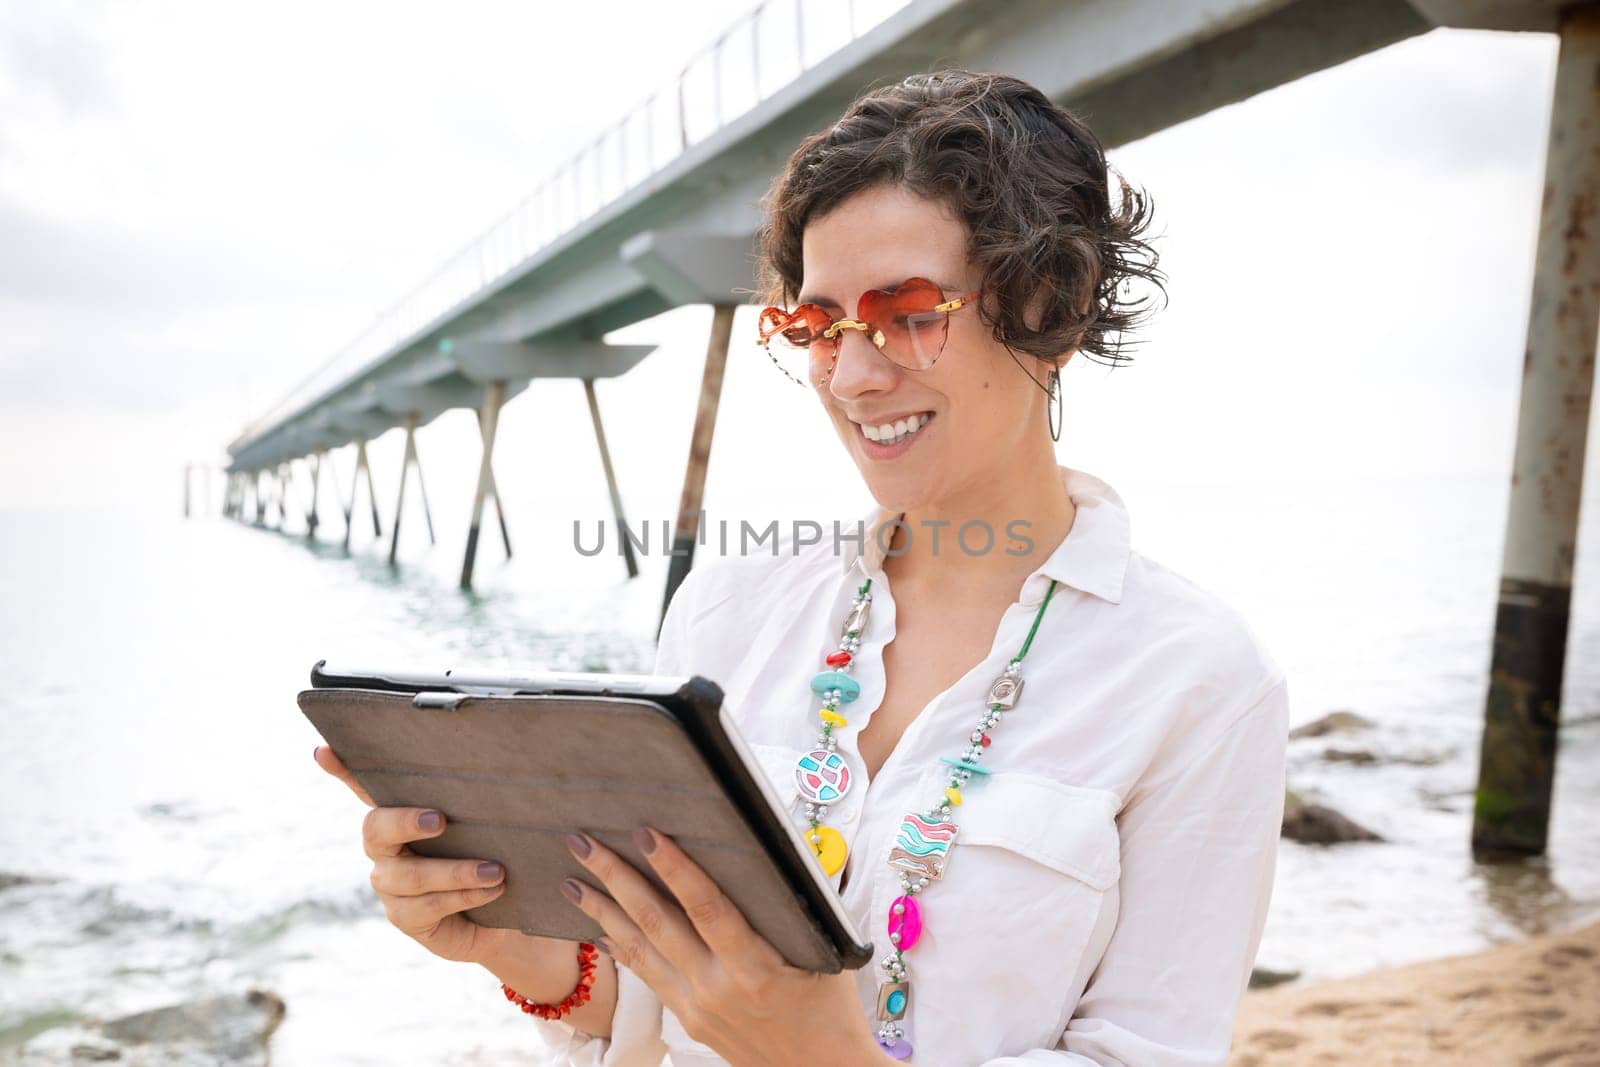 Woman on the beach with digital tablet in hand typing smiling with sunglasses